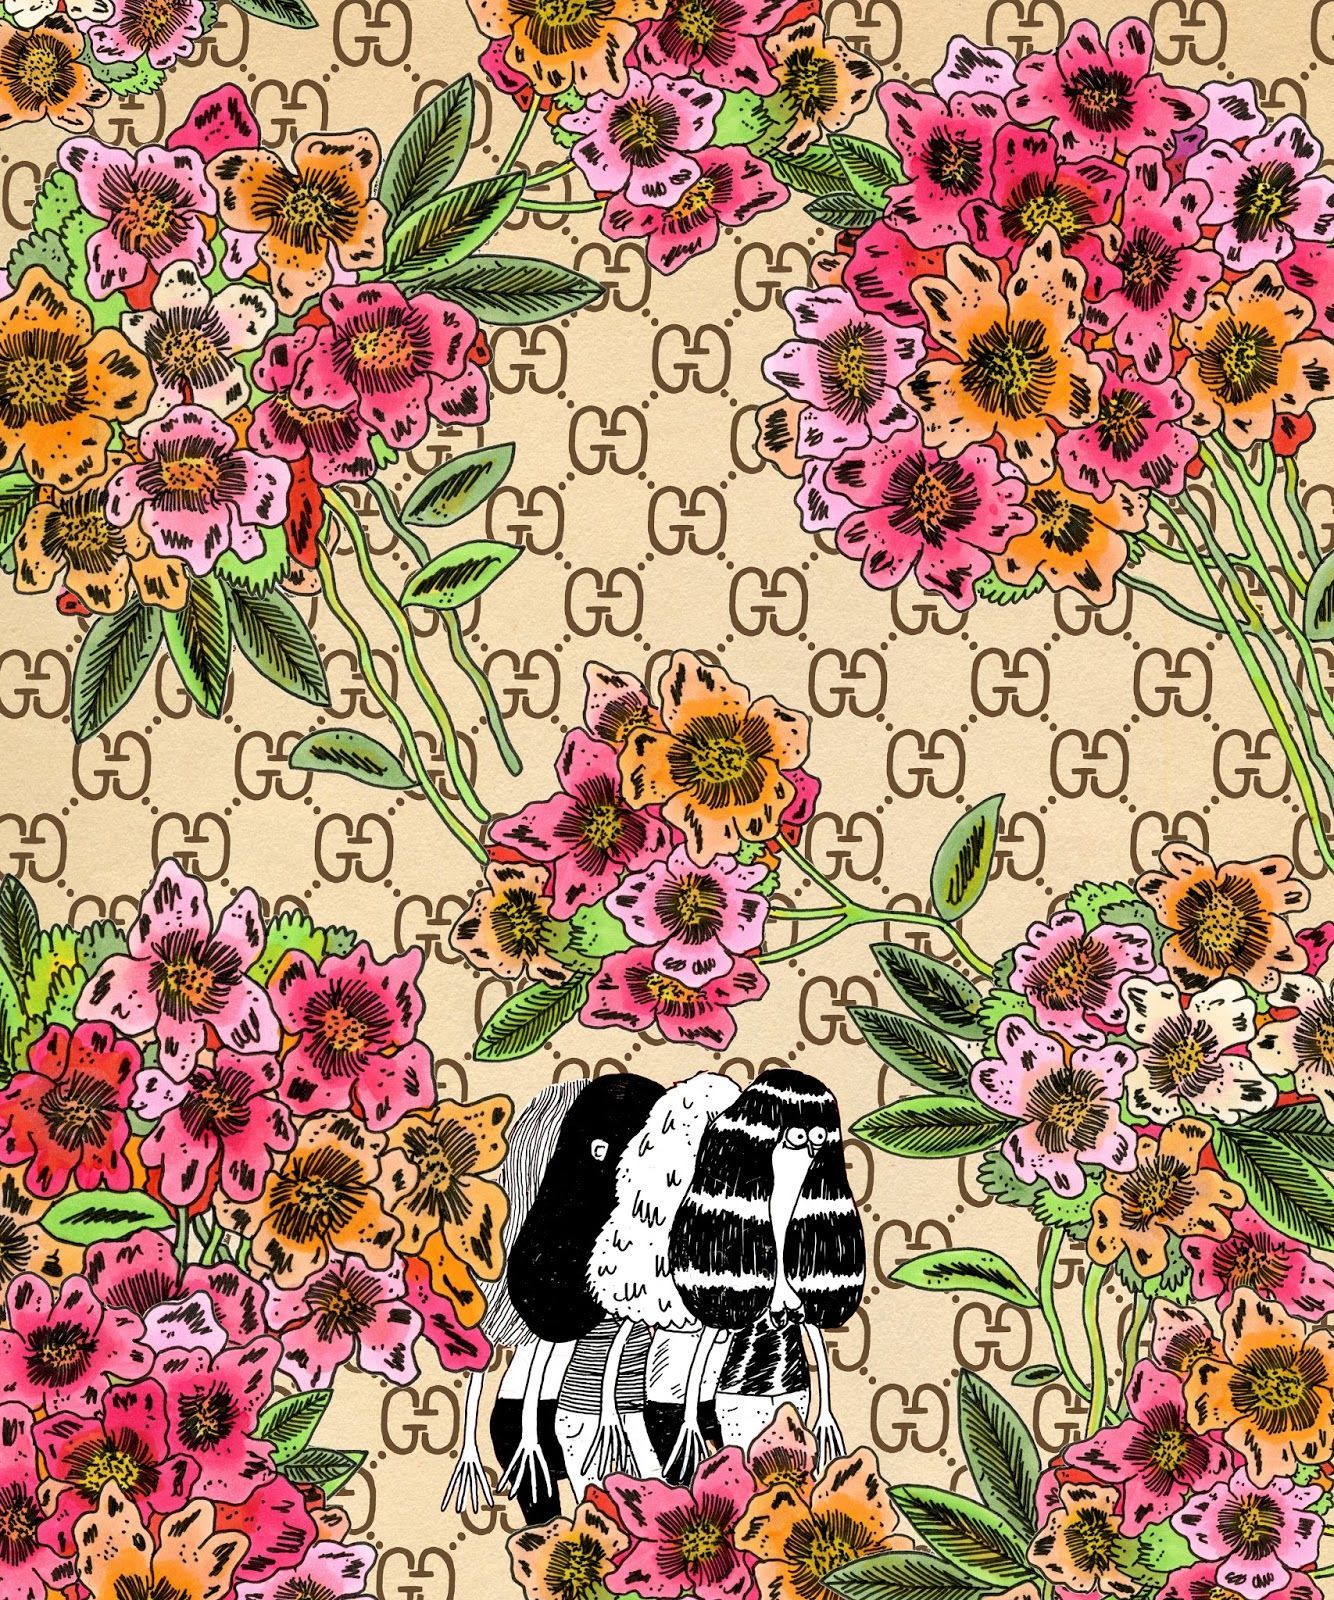 Gucci floral, Floral wallpaper, Flower painting